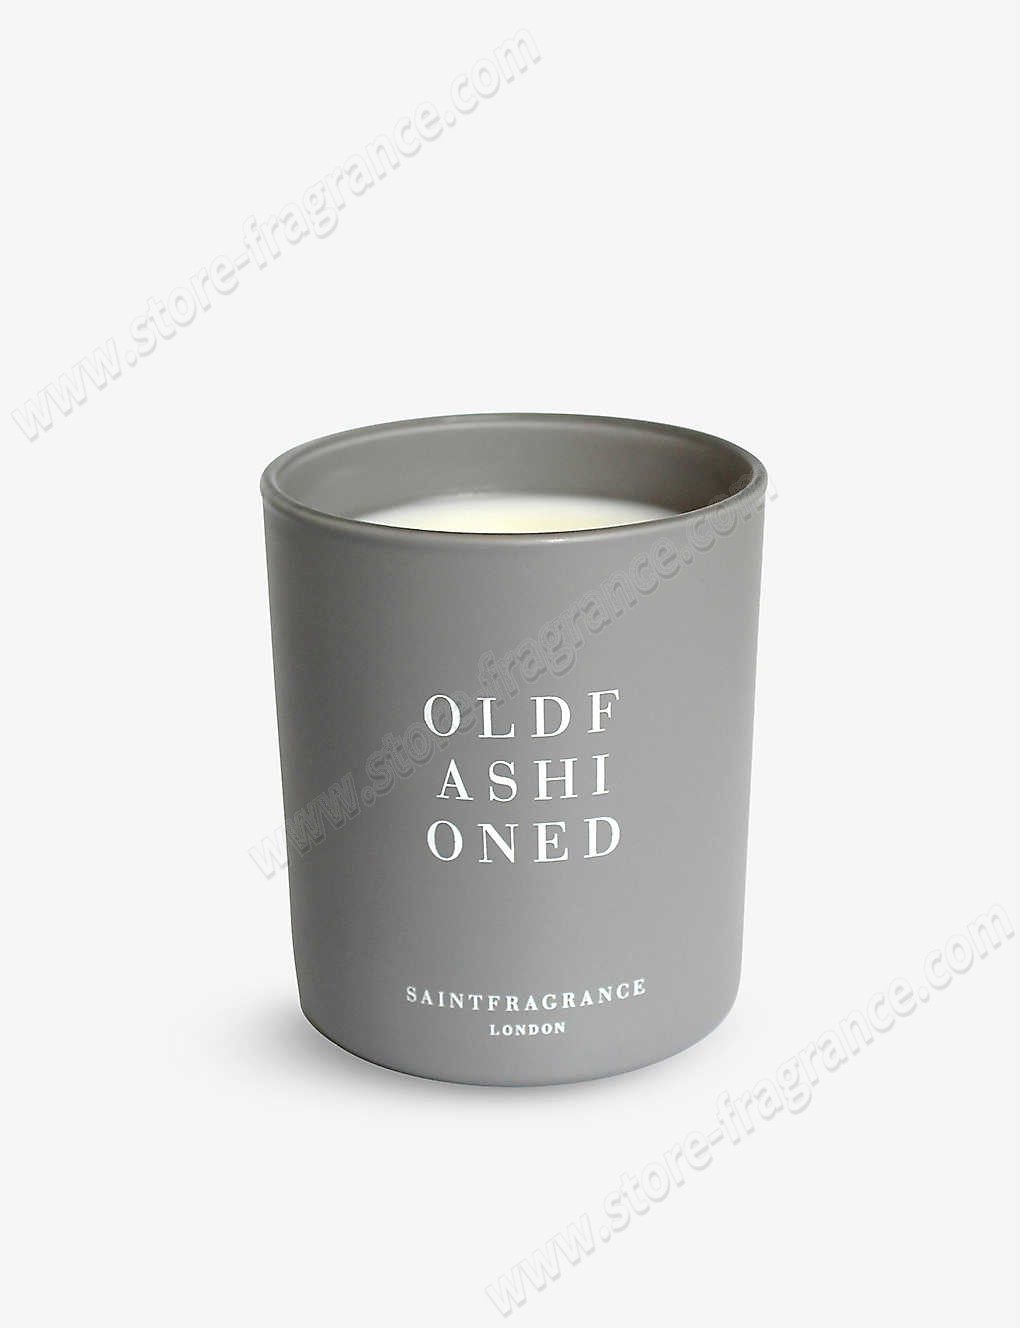 SAINT FRAGRANCE LONDON/Old Fashioned scented candle 200g ✿ Discount Store - SAINT FRAGRANCE LONDON/Old Fashioned scented candle 200g ✿ Discount Store